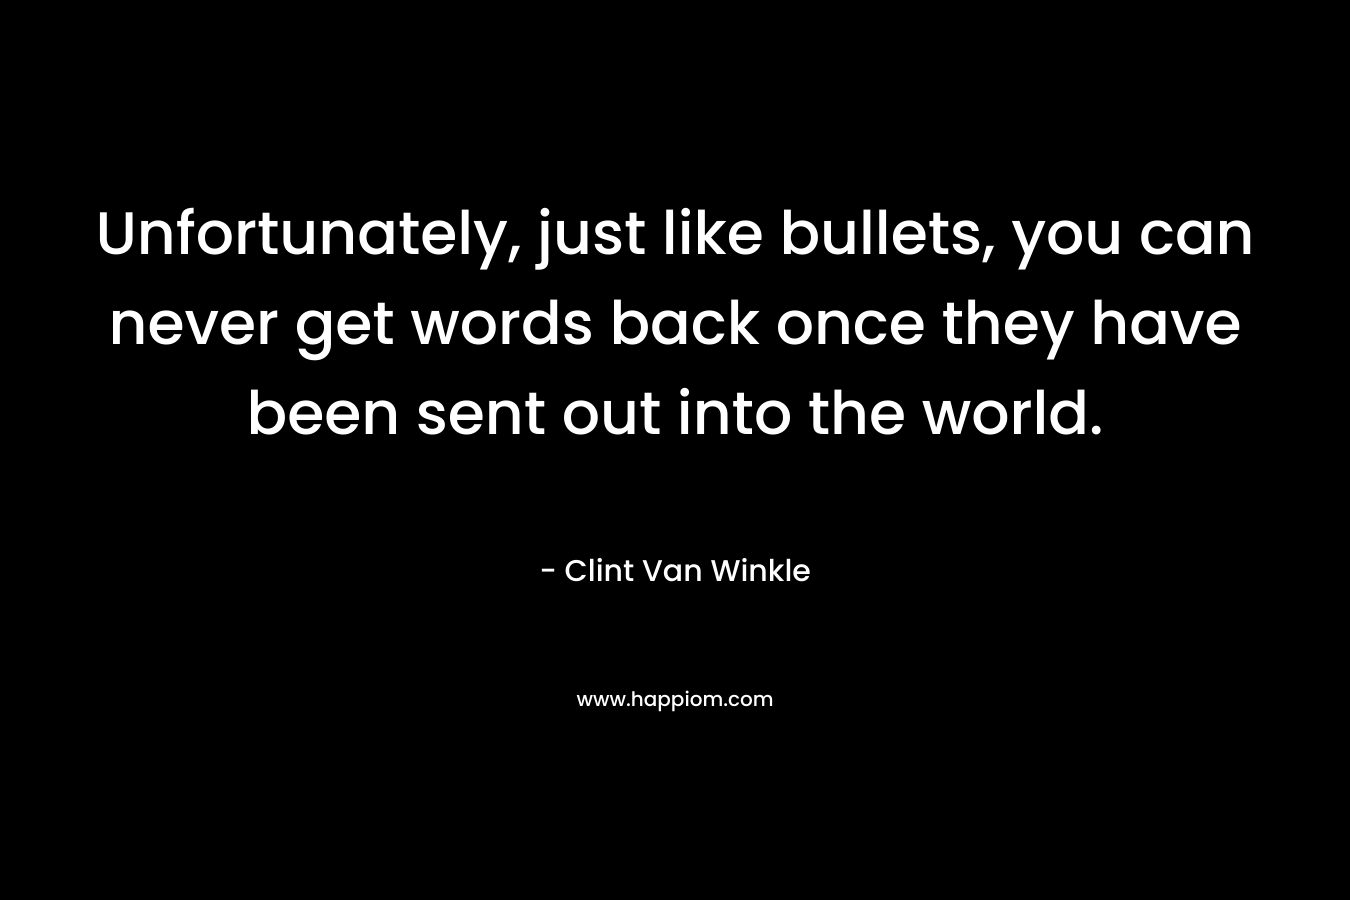 Unfortunately, just like bullets, you can never get words back once they have been sent out into the world.